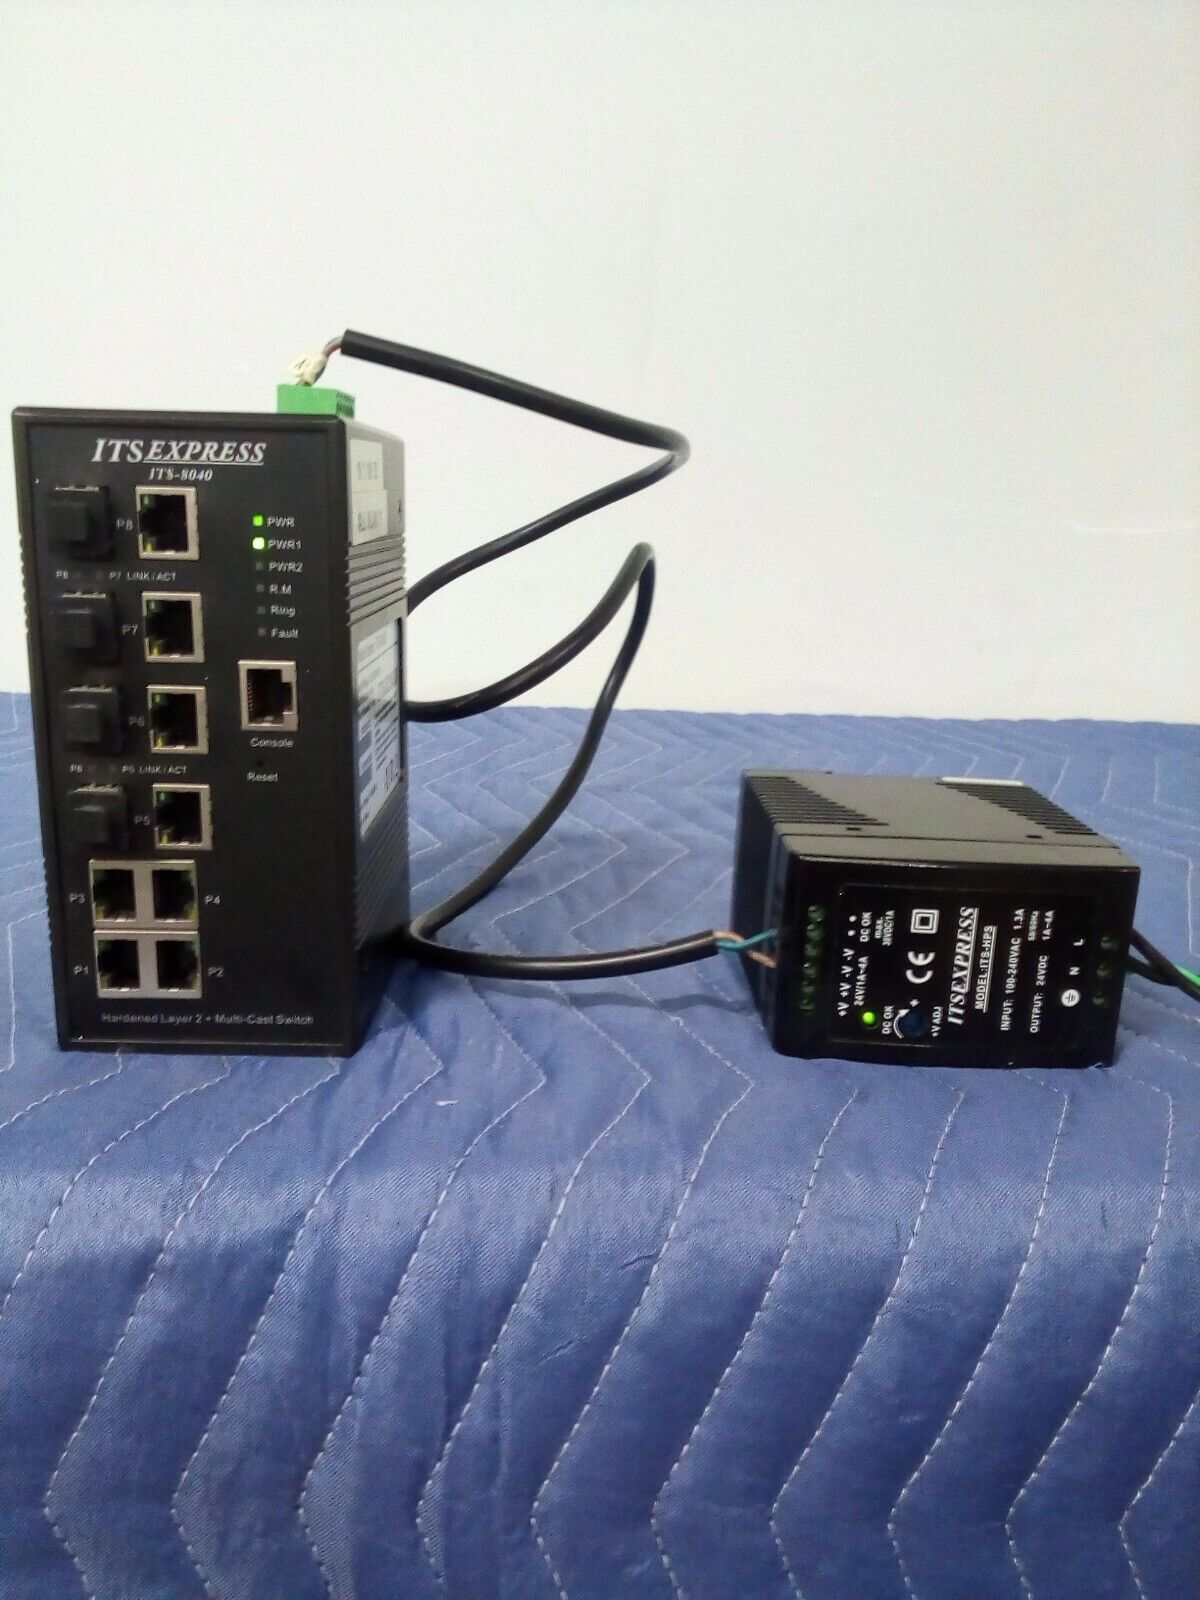 ITS EXPRESS ITS-8040 Hardened Layered 2+Multi-Cast Switch &ITS-HPS Power Adapter